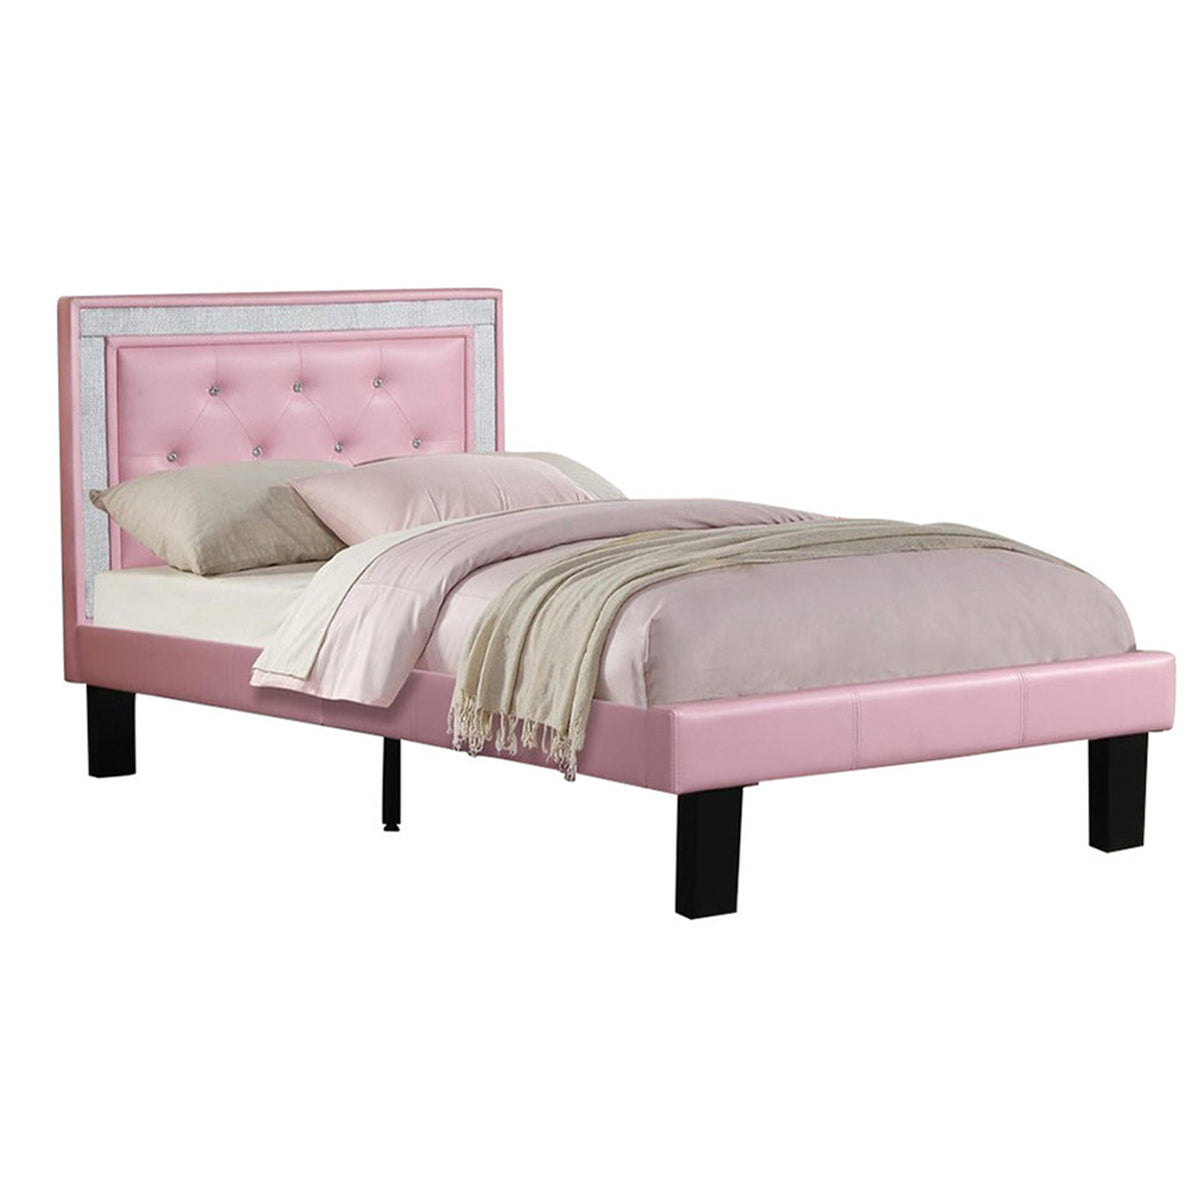 Silky And Sheeny Wooden Full Bed With Pink PU Tufted Head Board, Pink Finish - BM168652